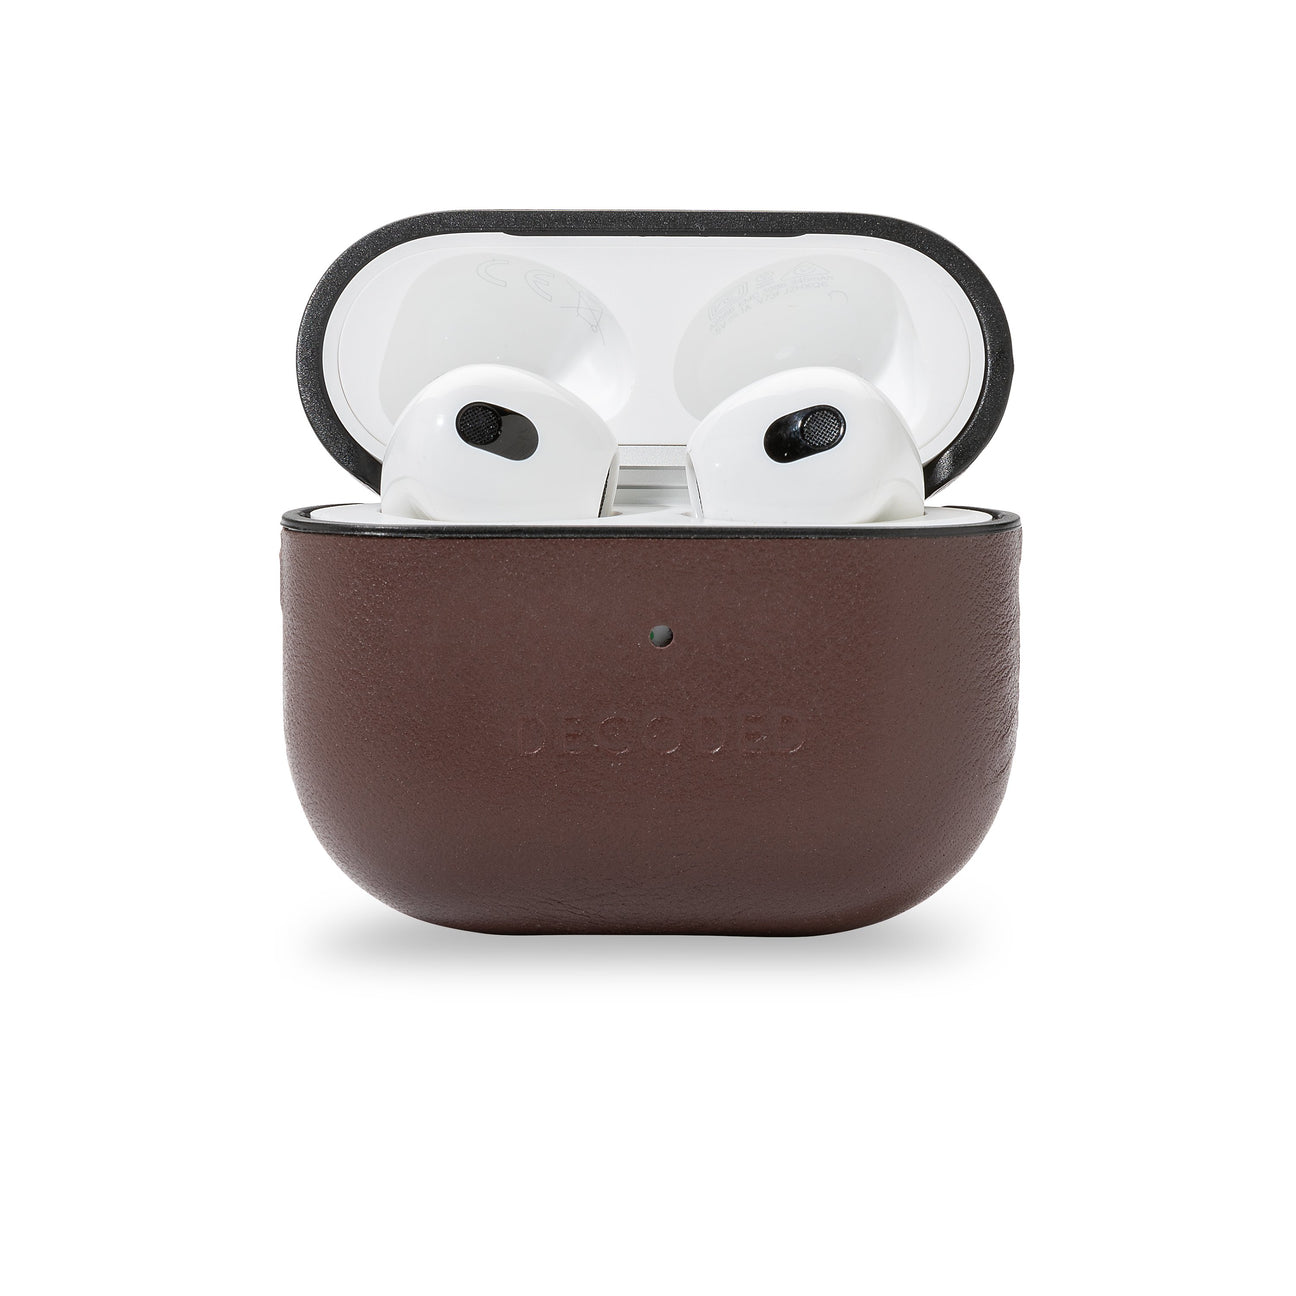 Decoded - AirCase Lite Brown - AirPods 3rd Gen